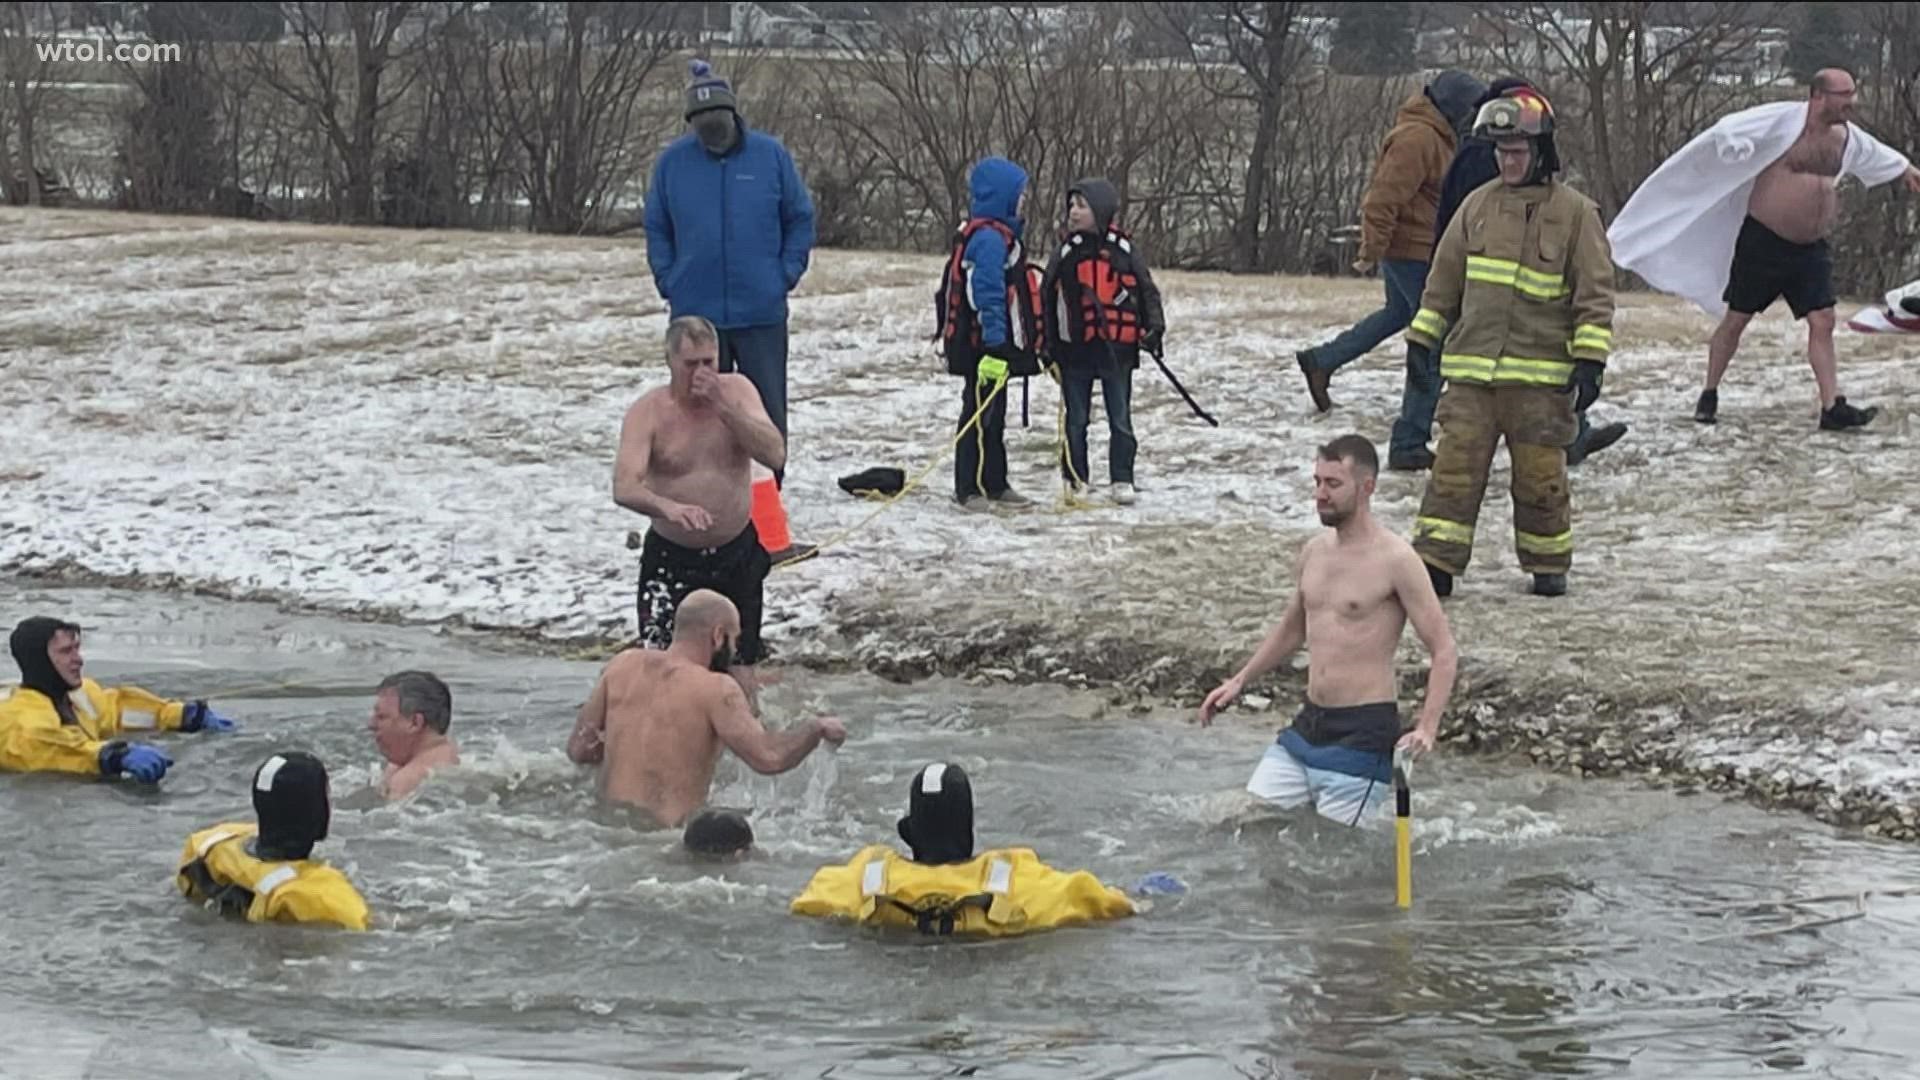 Over 100 brave chilly water for Tiffin Polar Bear Jump wtol